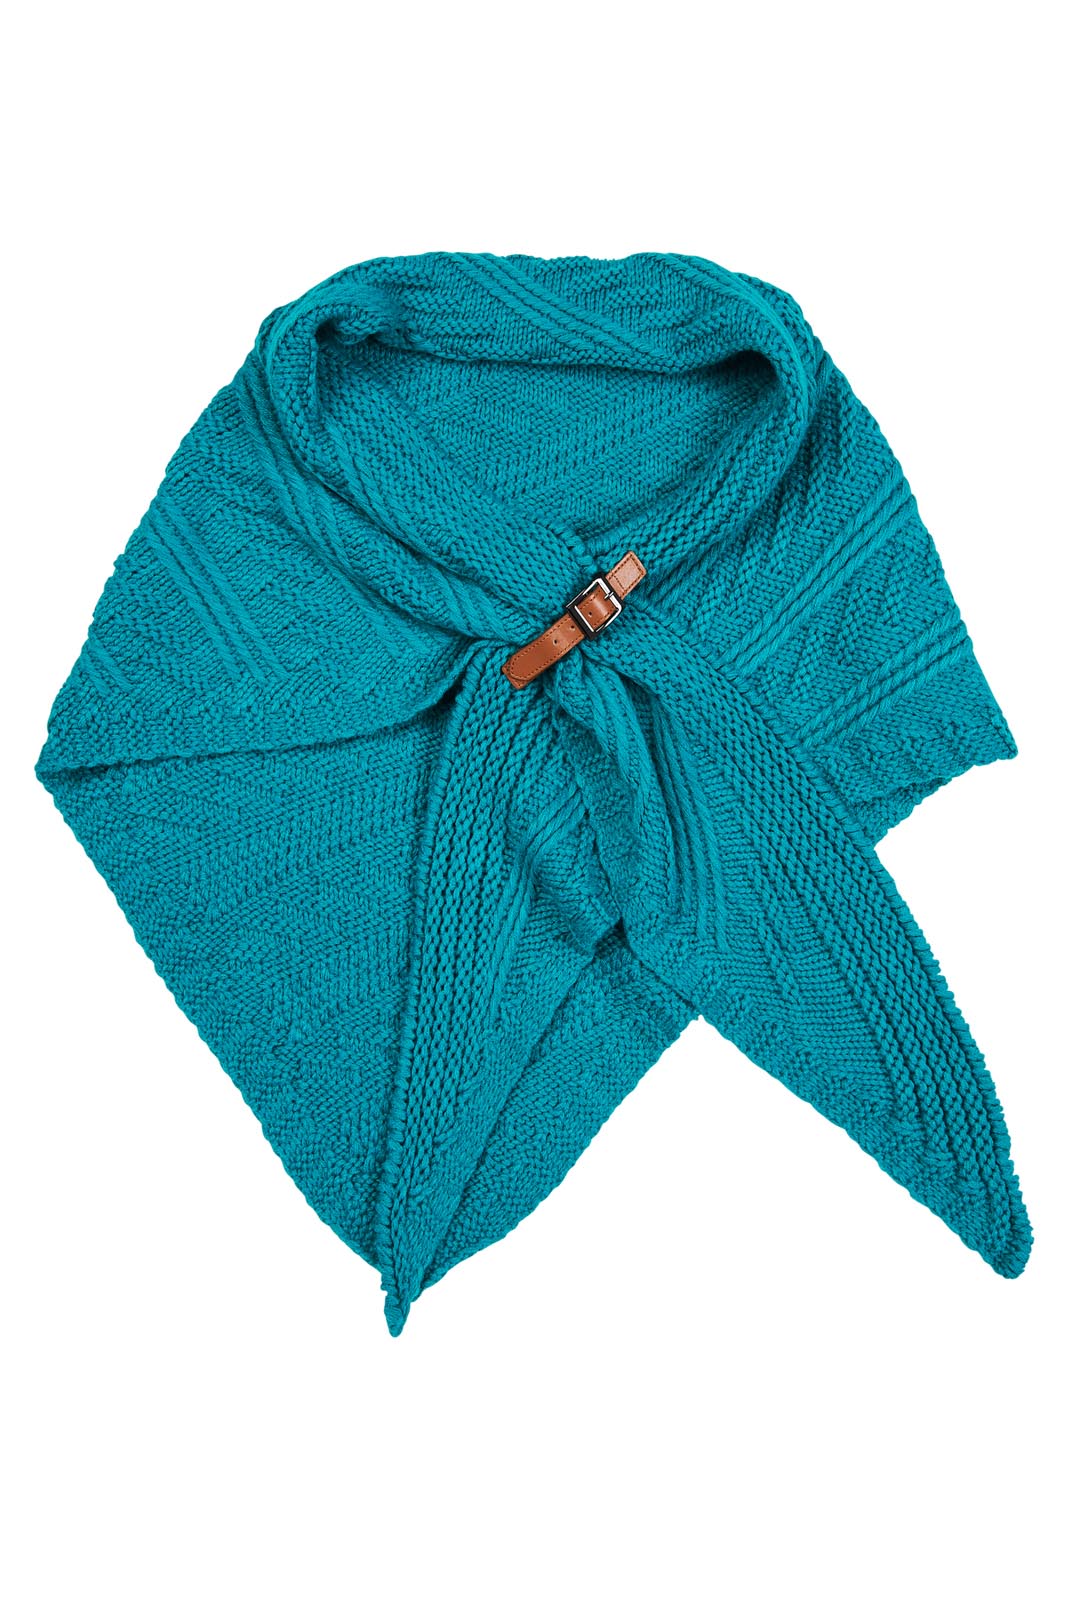 Sepia Cable Scarf - Teal - eb&ive Scarves